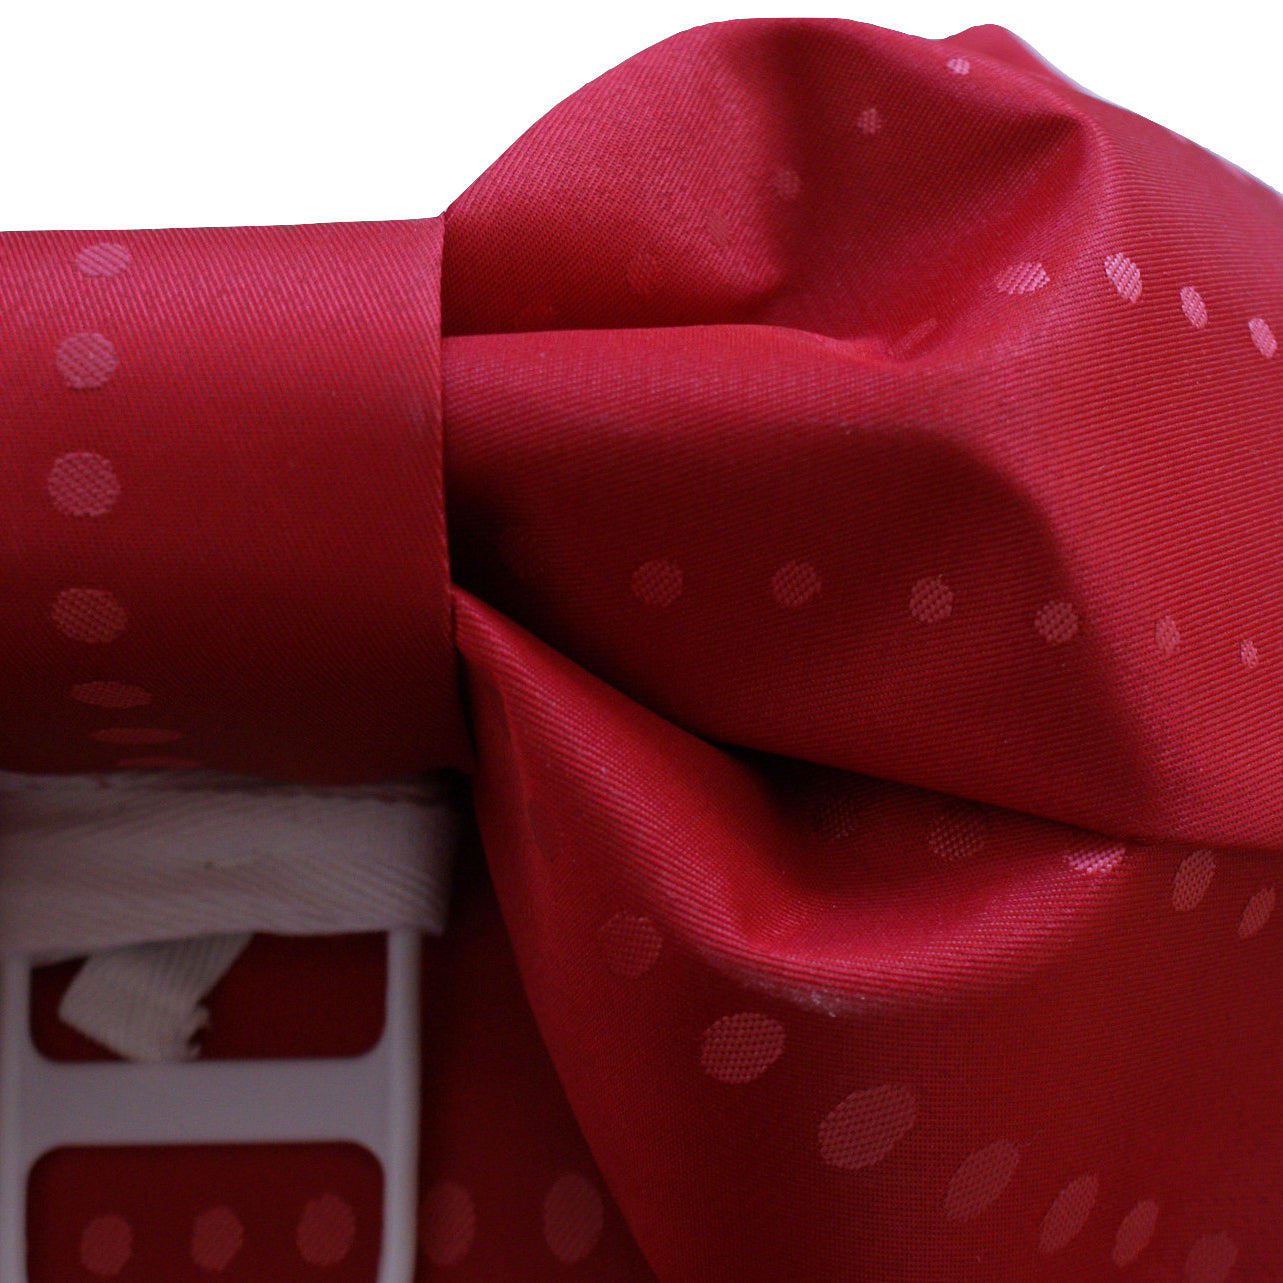 Pre-Tied Obi Belt - Dotted Red